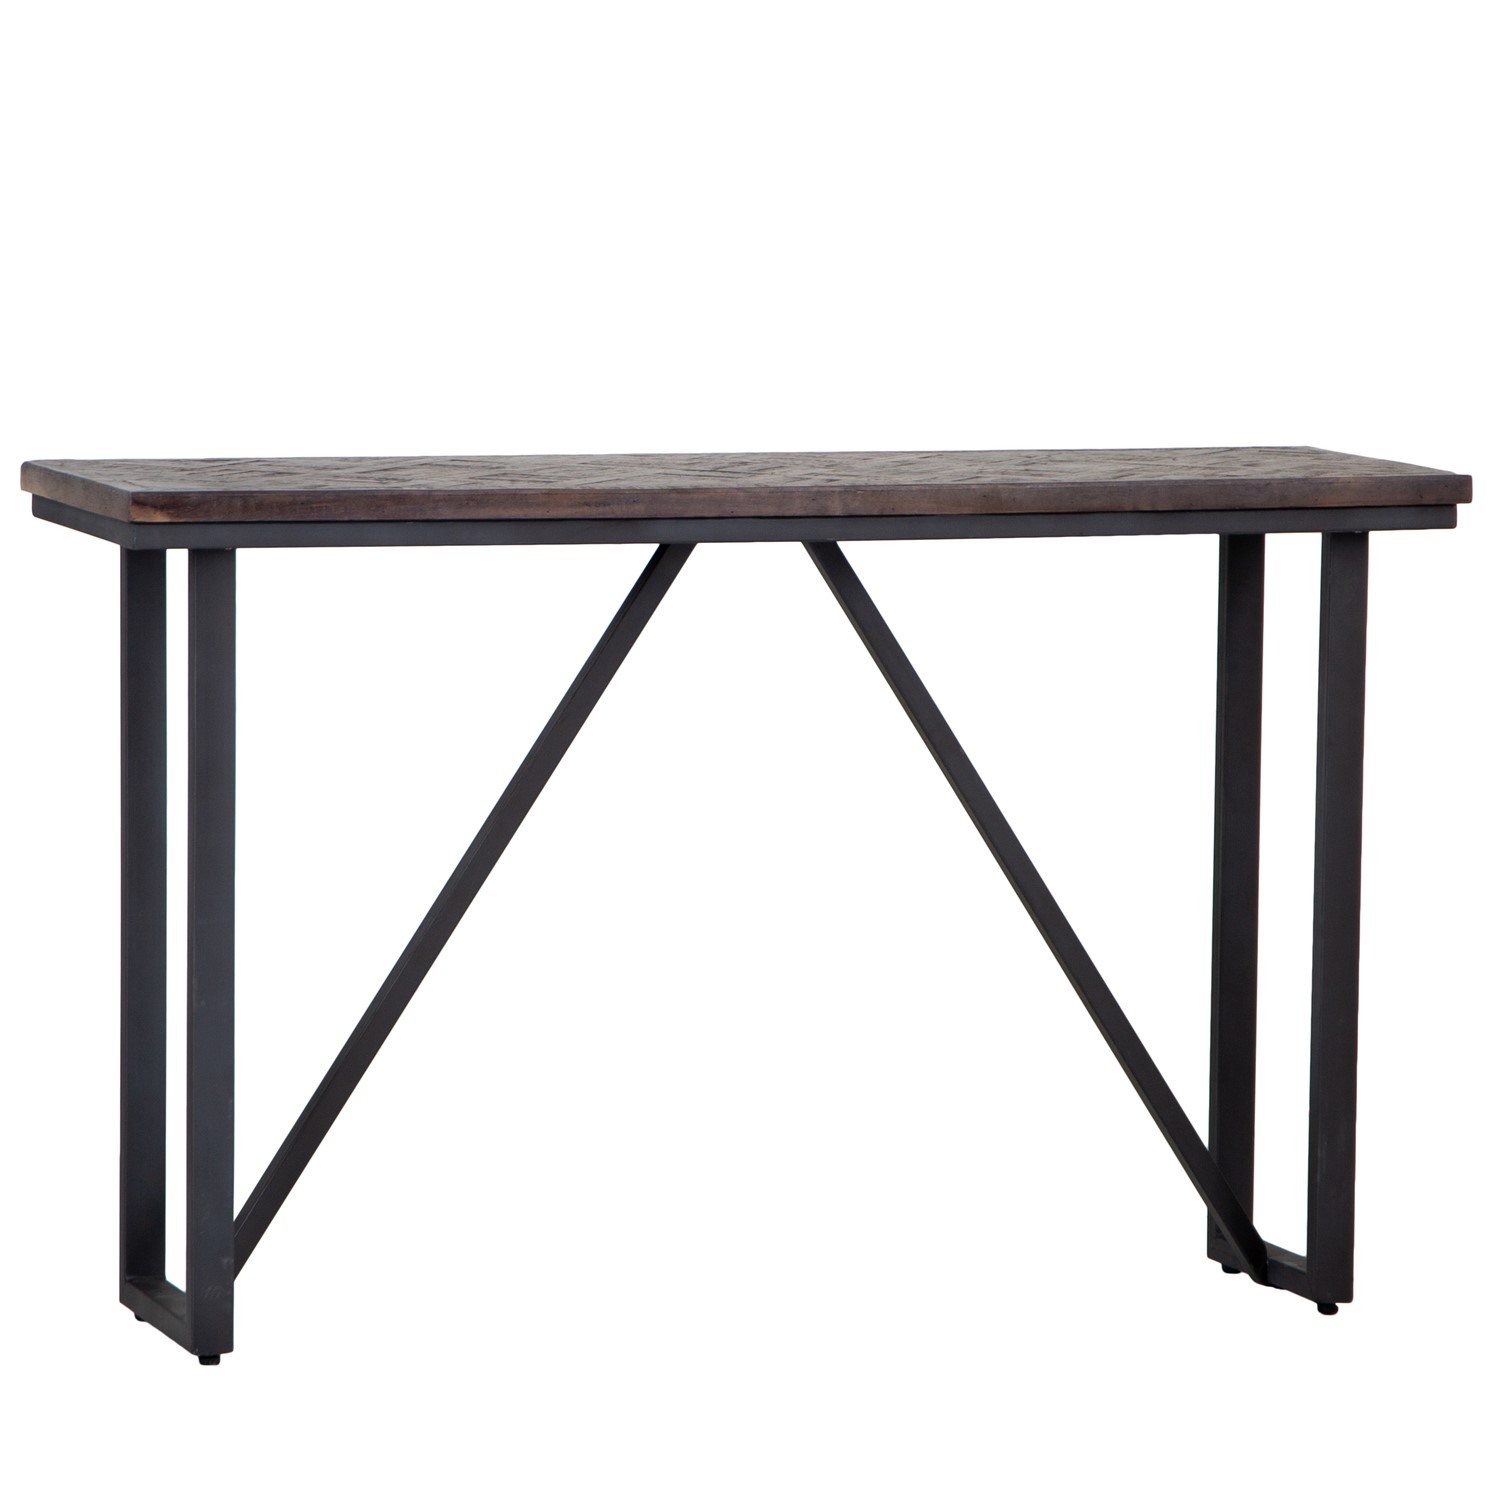 Read more about Industrial style teak & iron bar table 1.4m